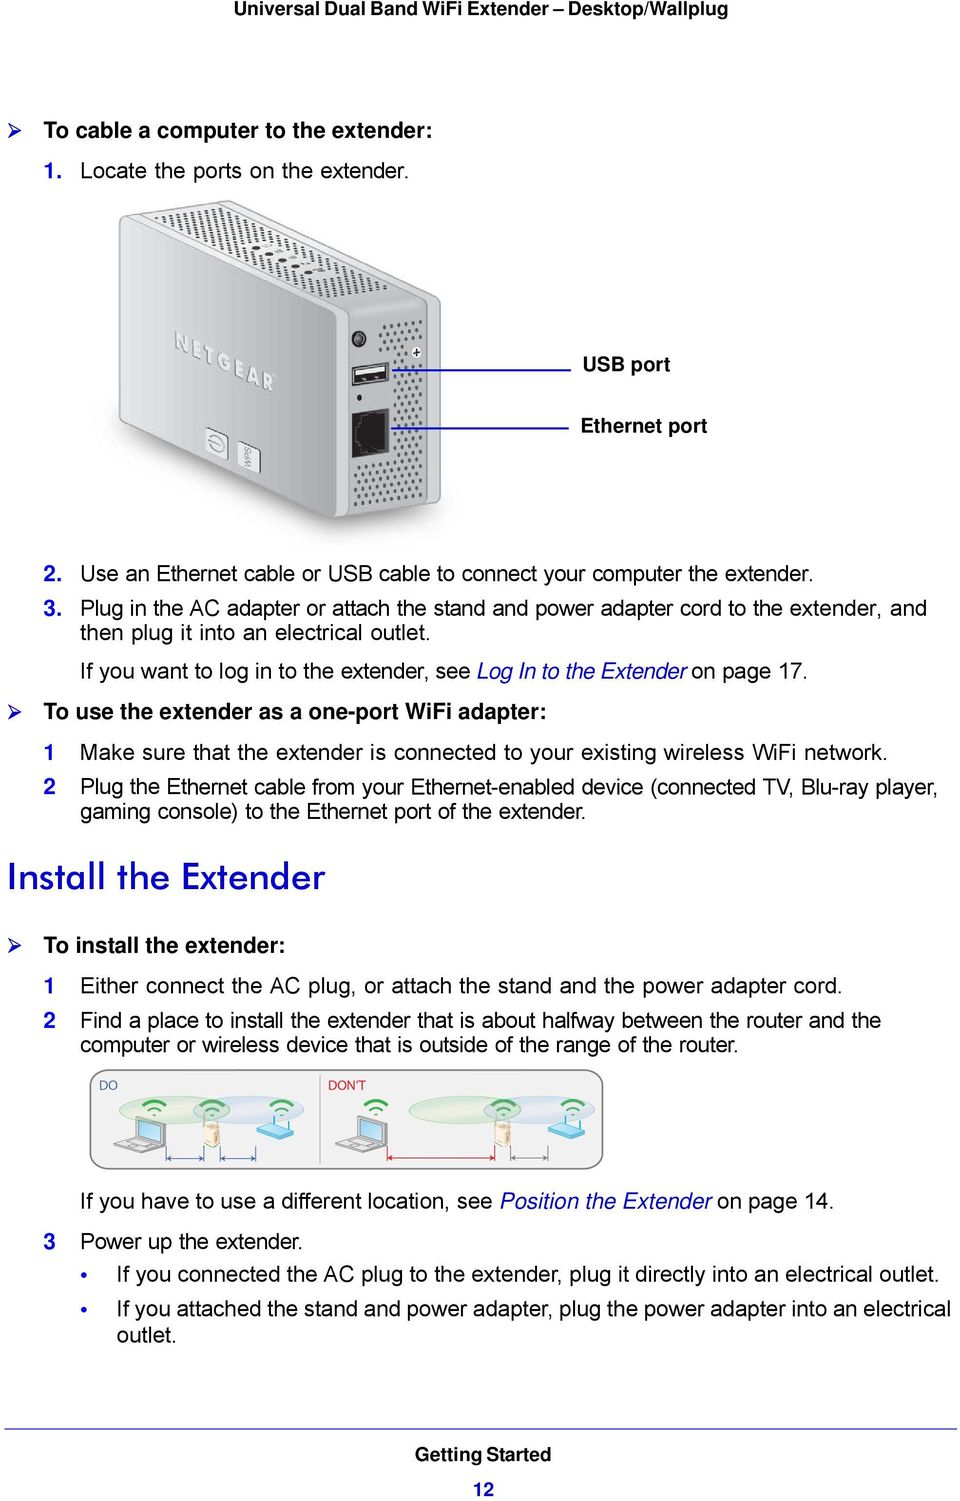 If you want to log in to the extender, see Log In to the Extender on page 17.